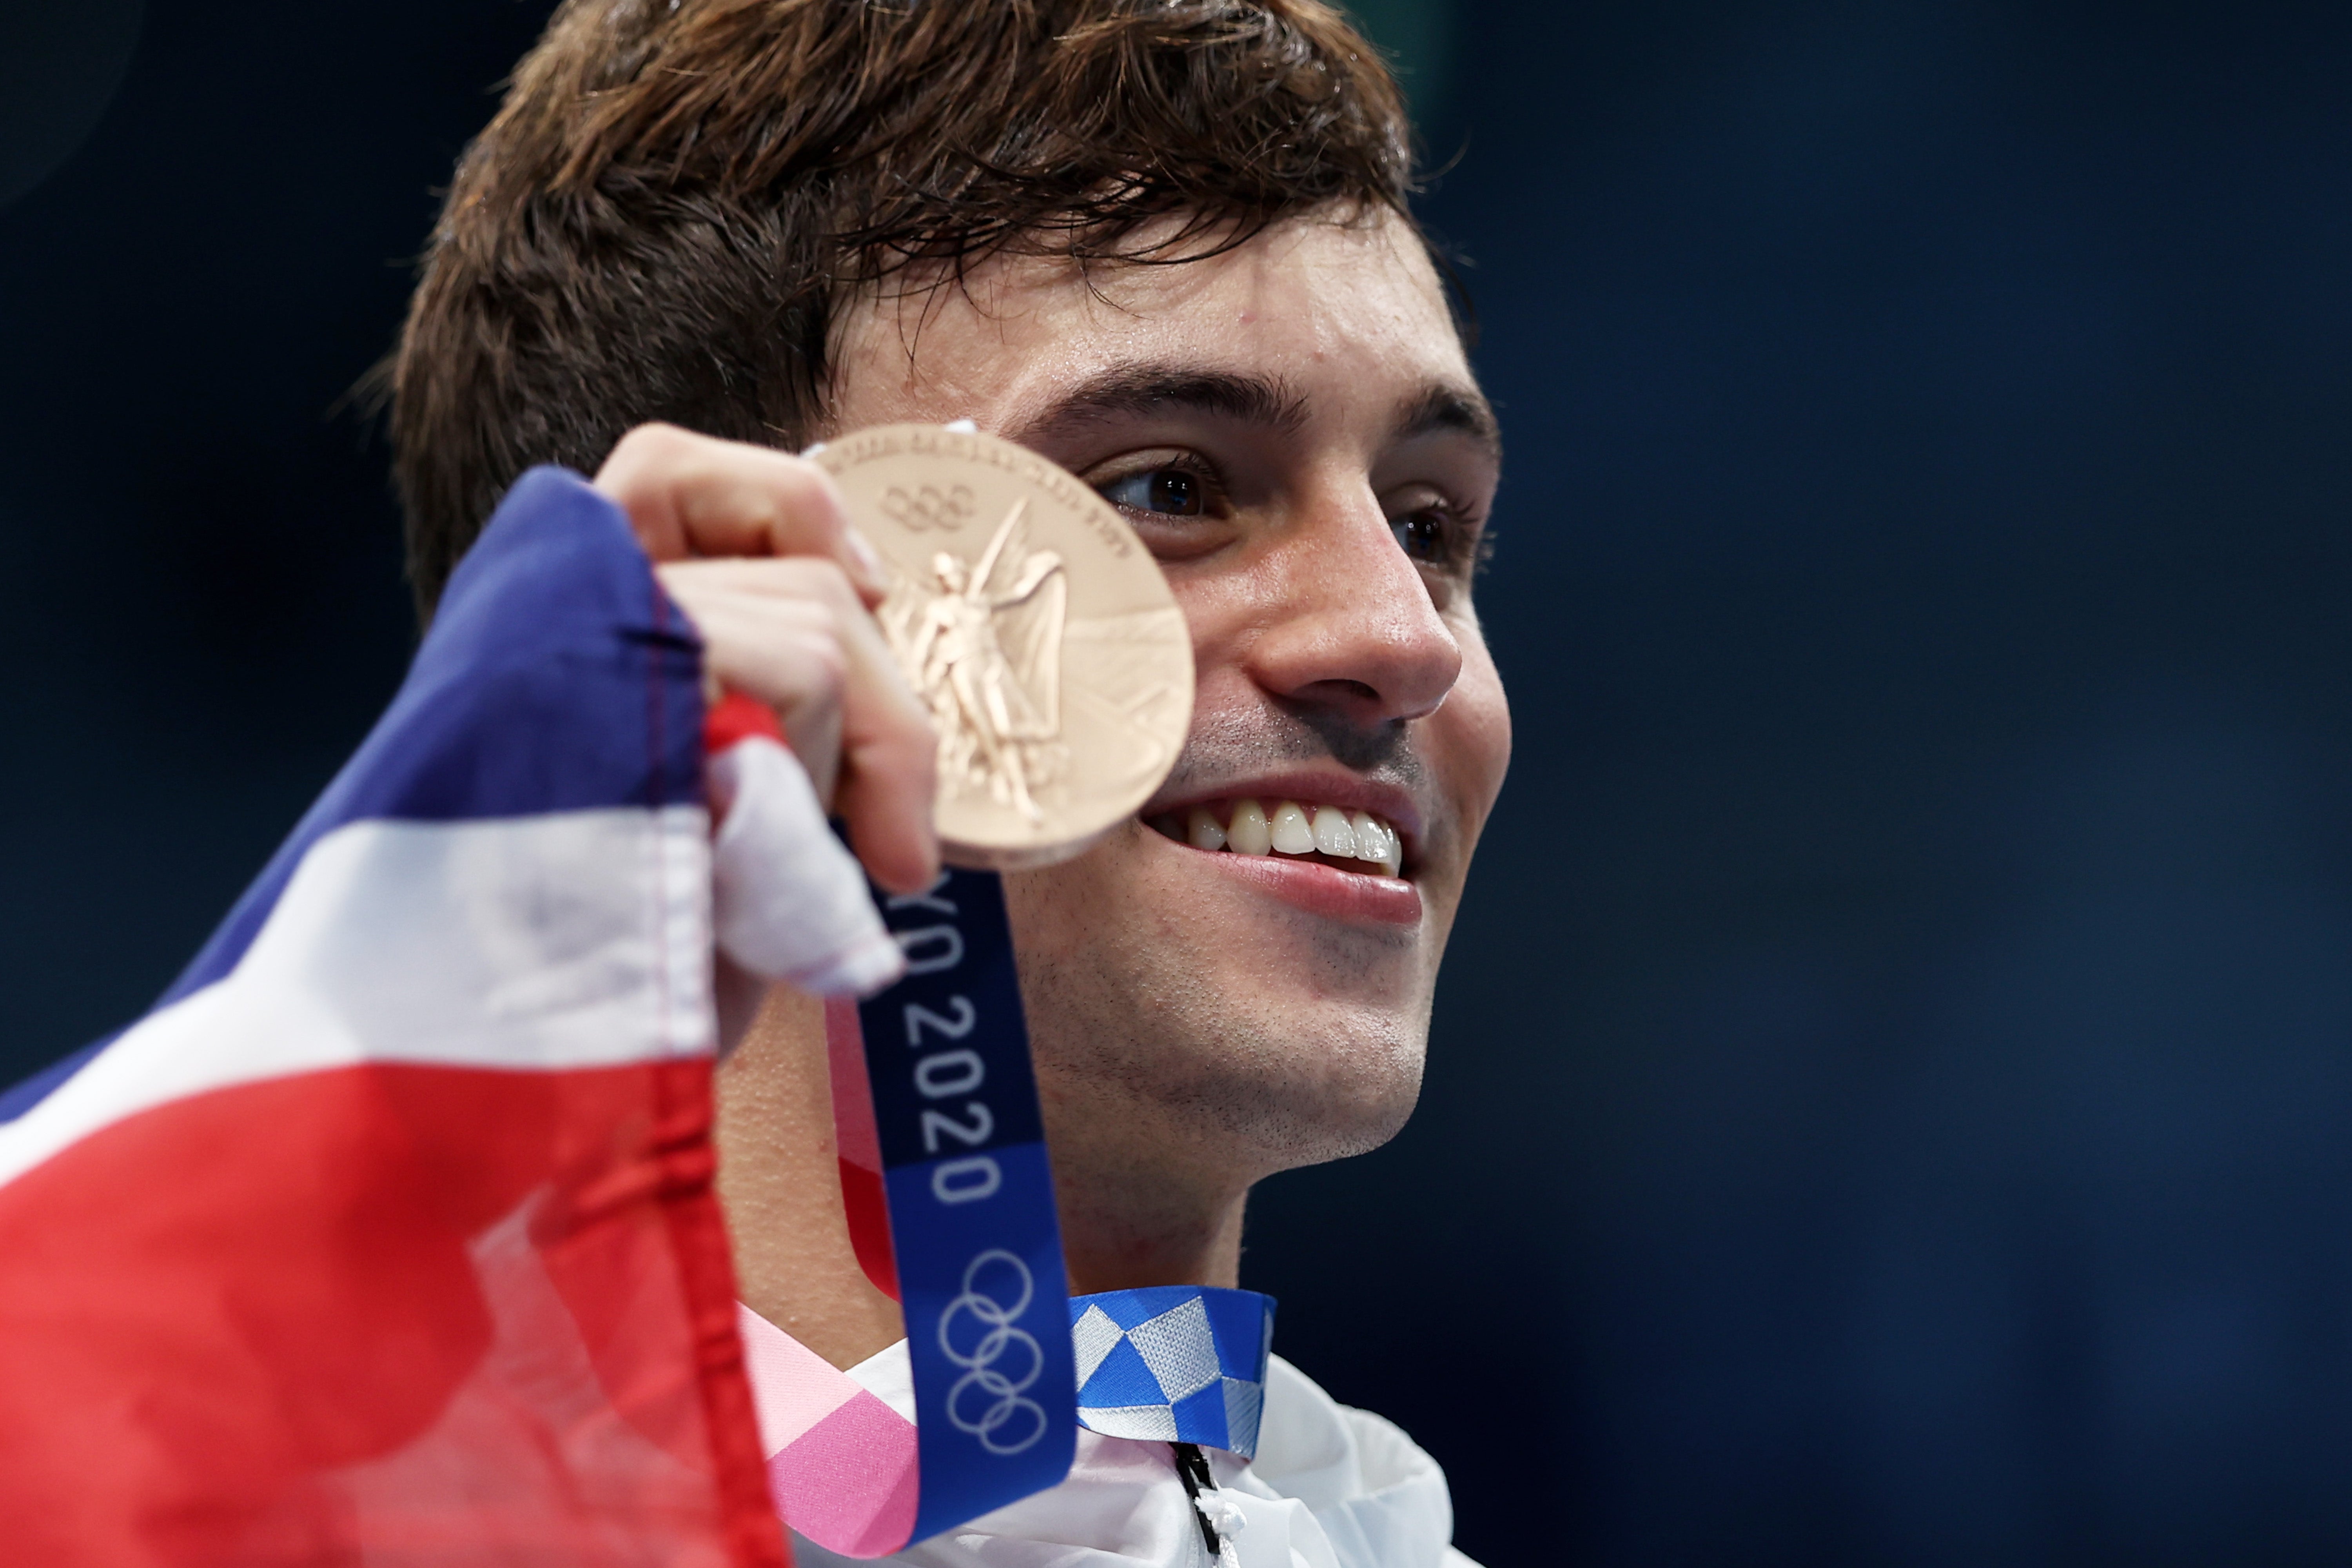 Bronze medalist Tom Daley of Team Great Britain poses after the medal ceremony